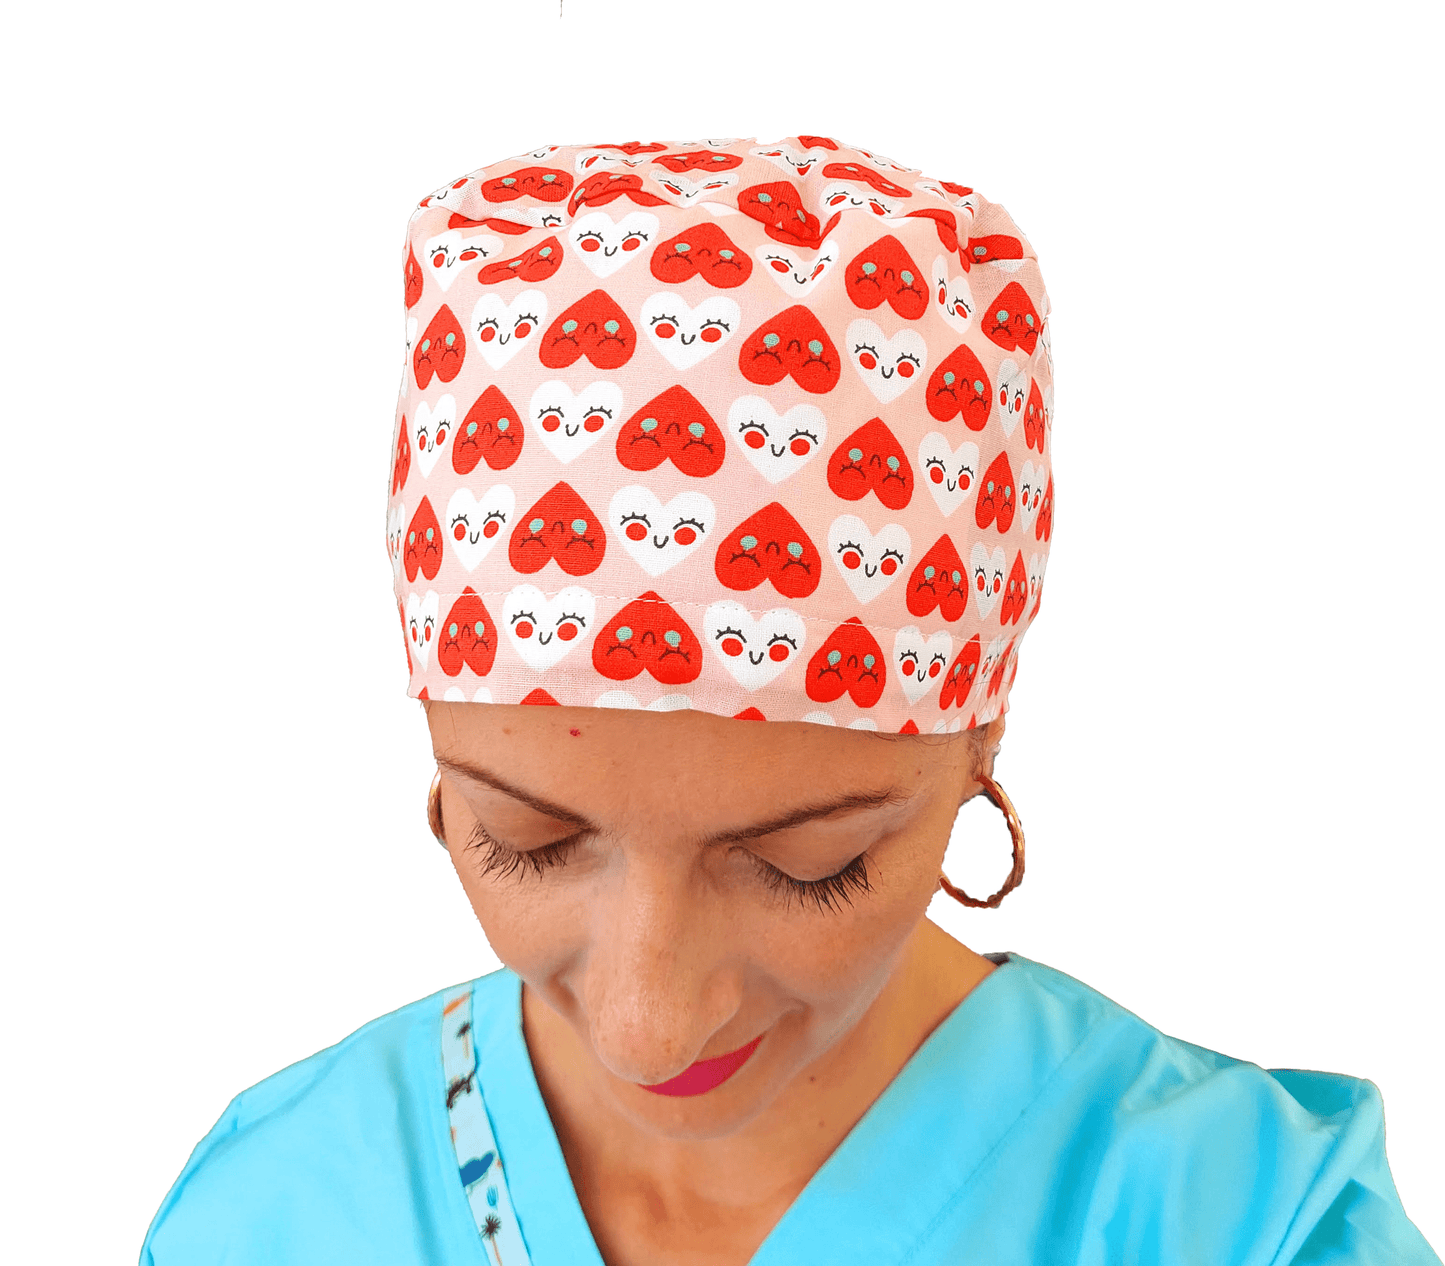 Ponytail Scrub Cap with Red Hearts